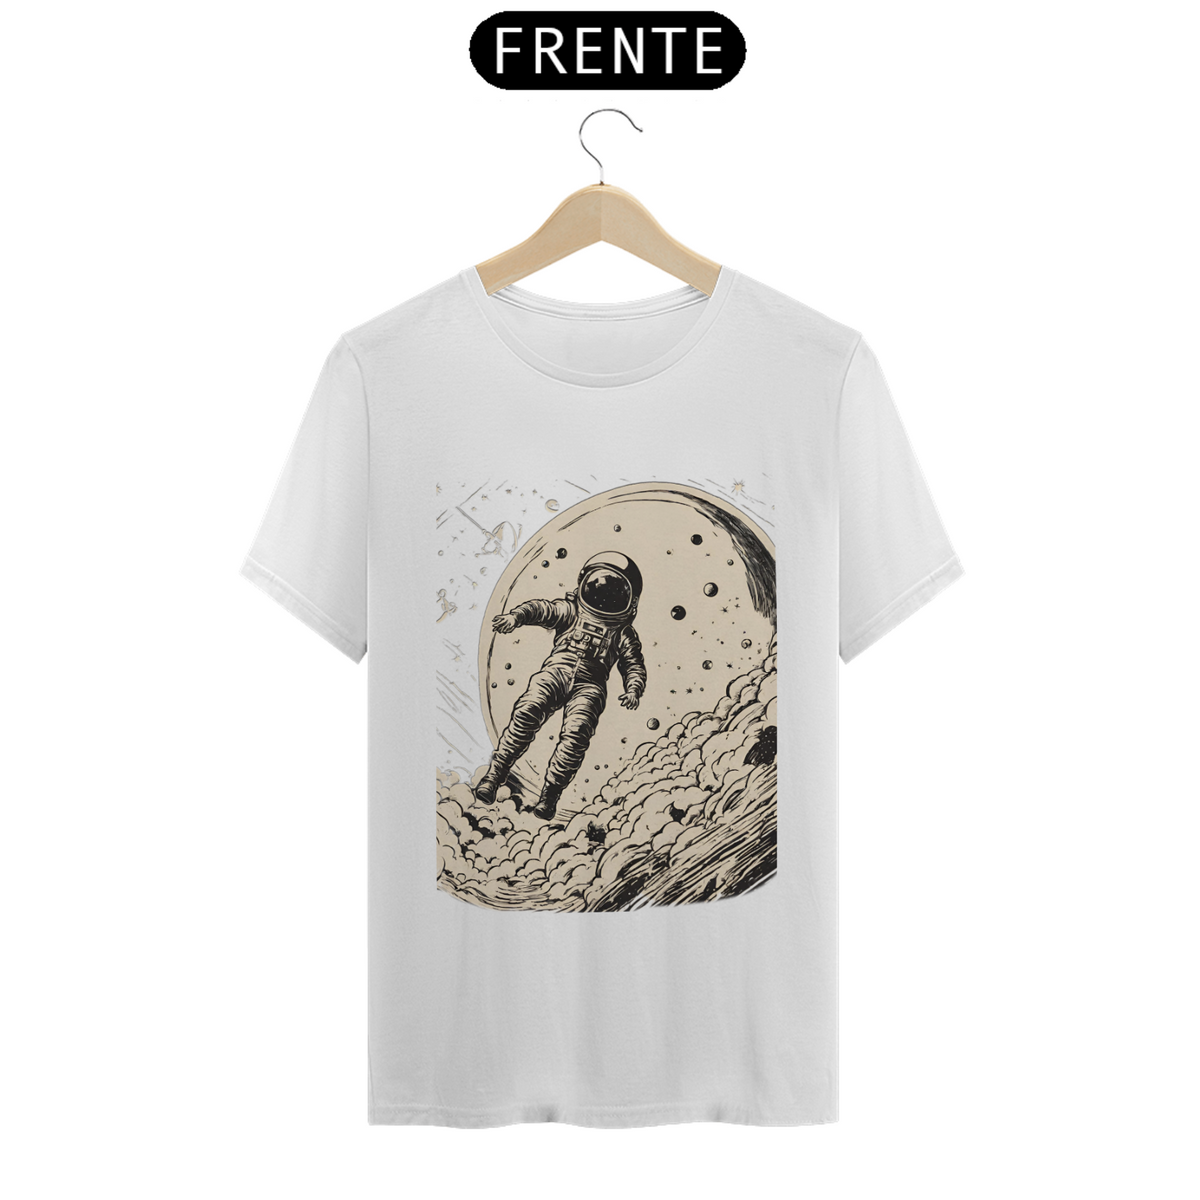 Nome do produto: T shirt Lost in Space